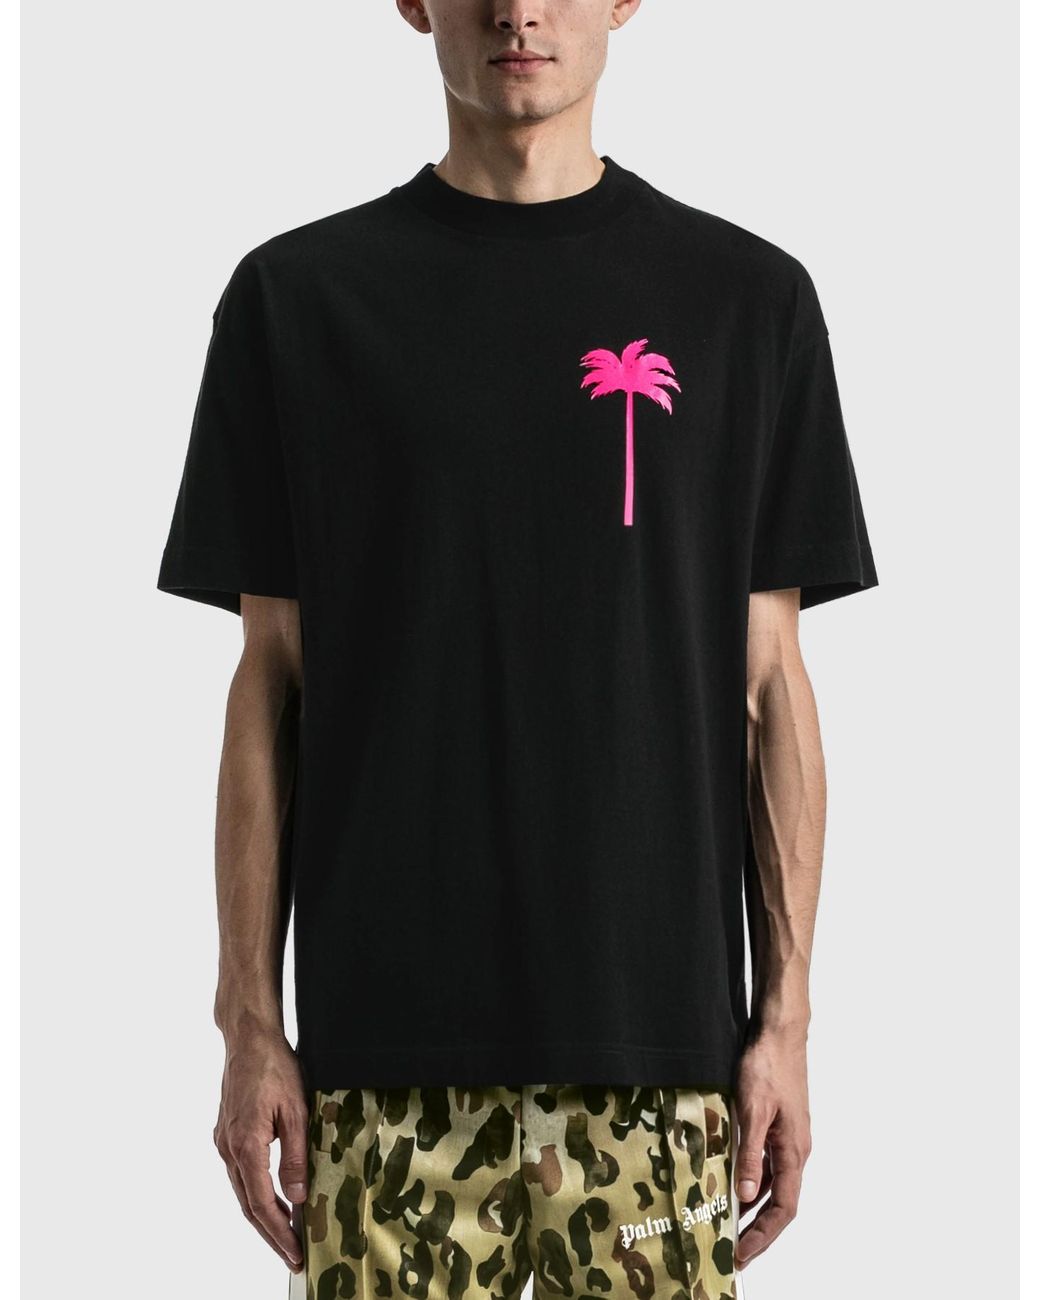 Palm Angels Palm Tree Classic T-shirt in Black for Men - Lyst